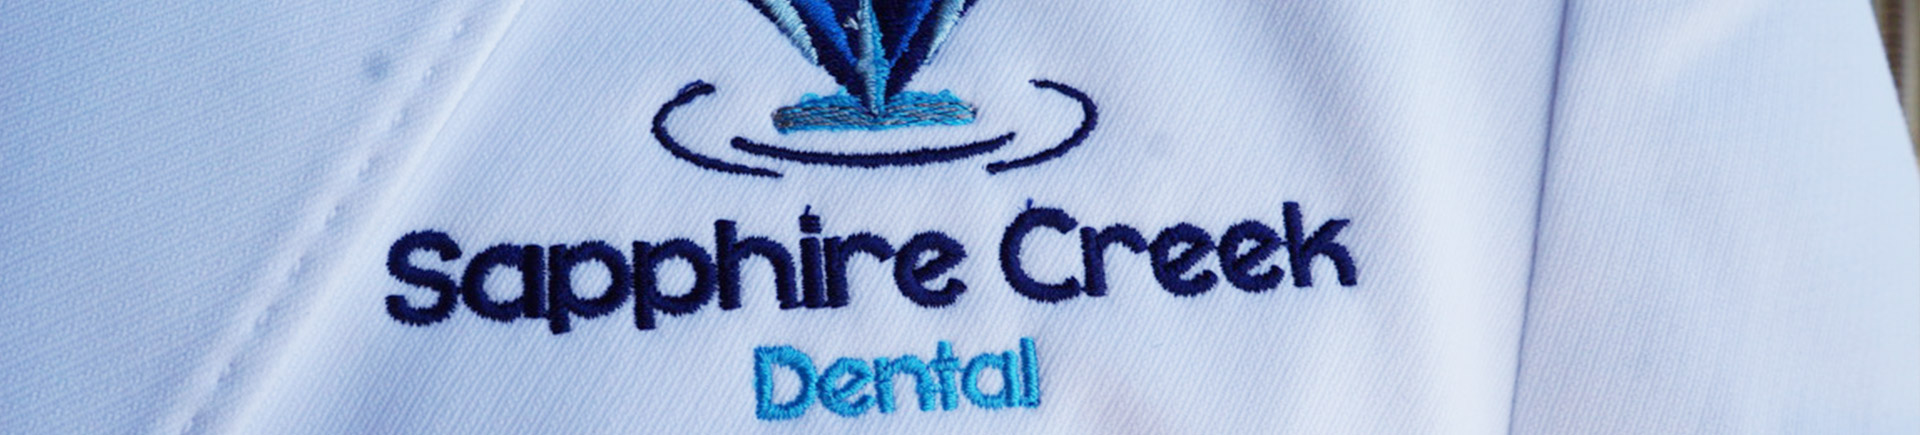 Use Your Yearly Dental Benefits Before They Expire New Braunfels, TX